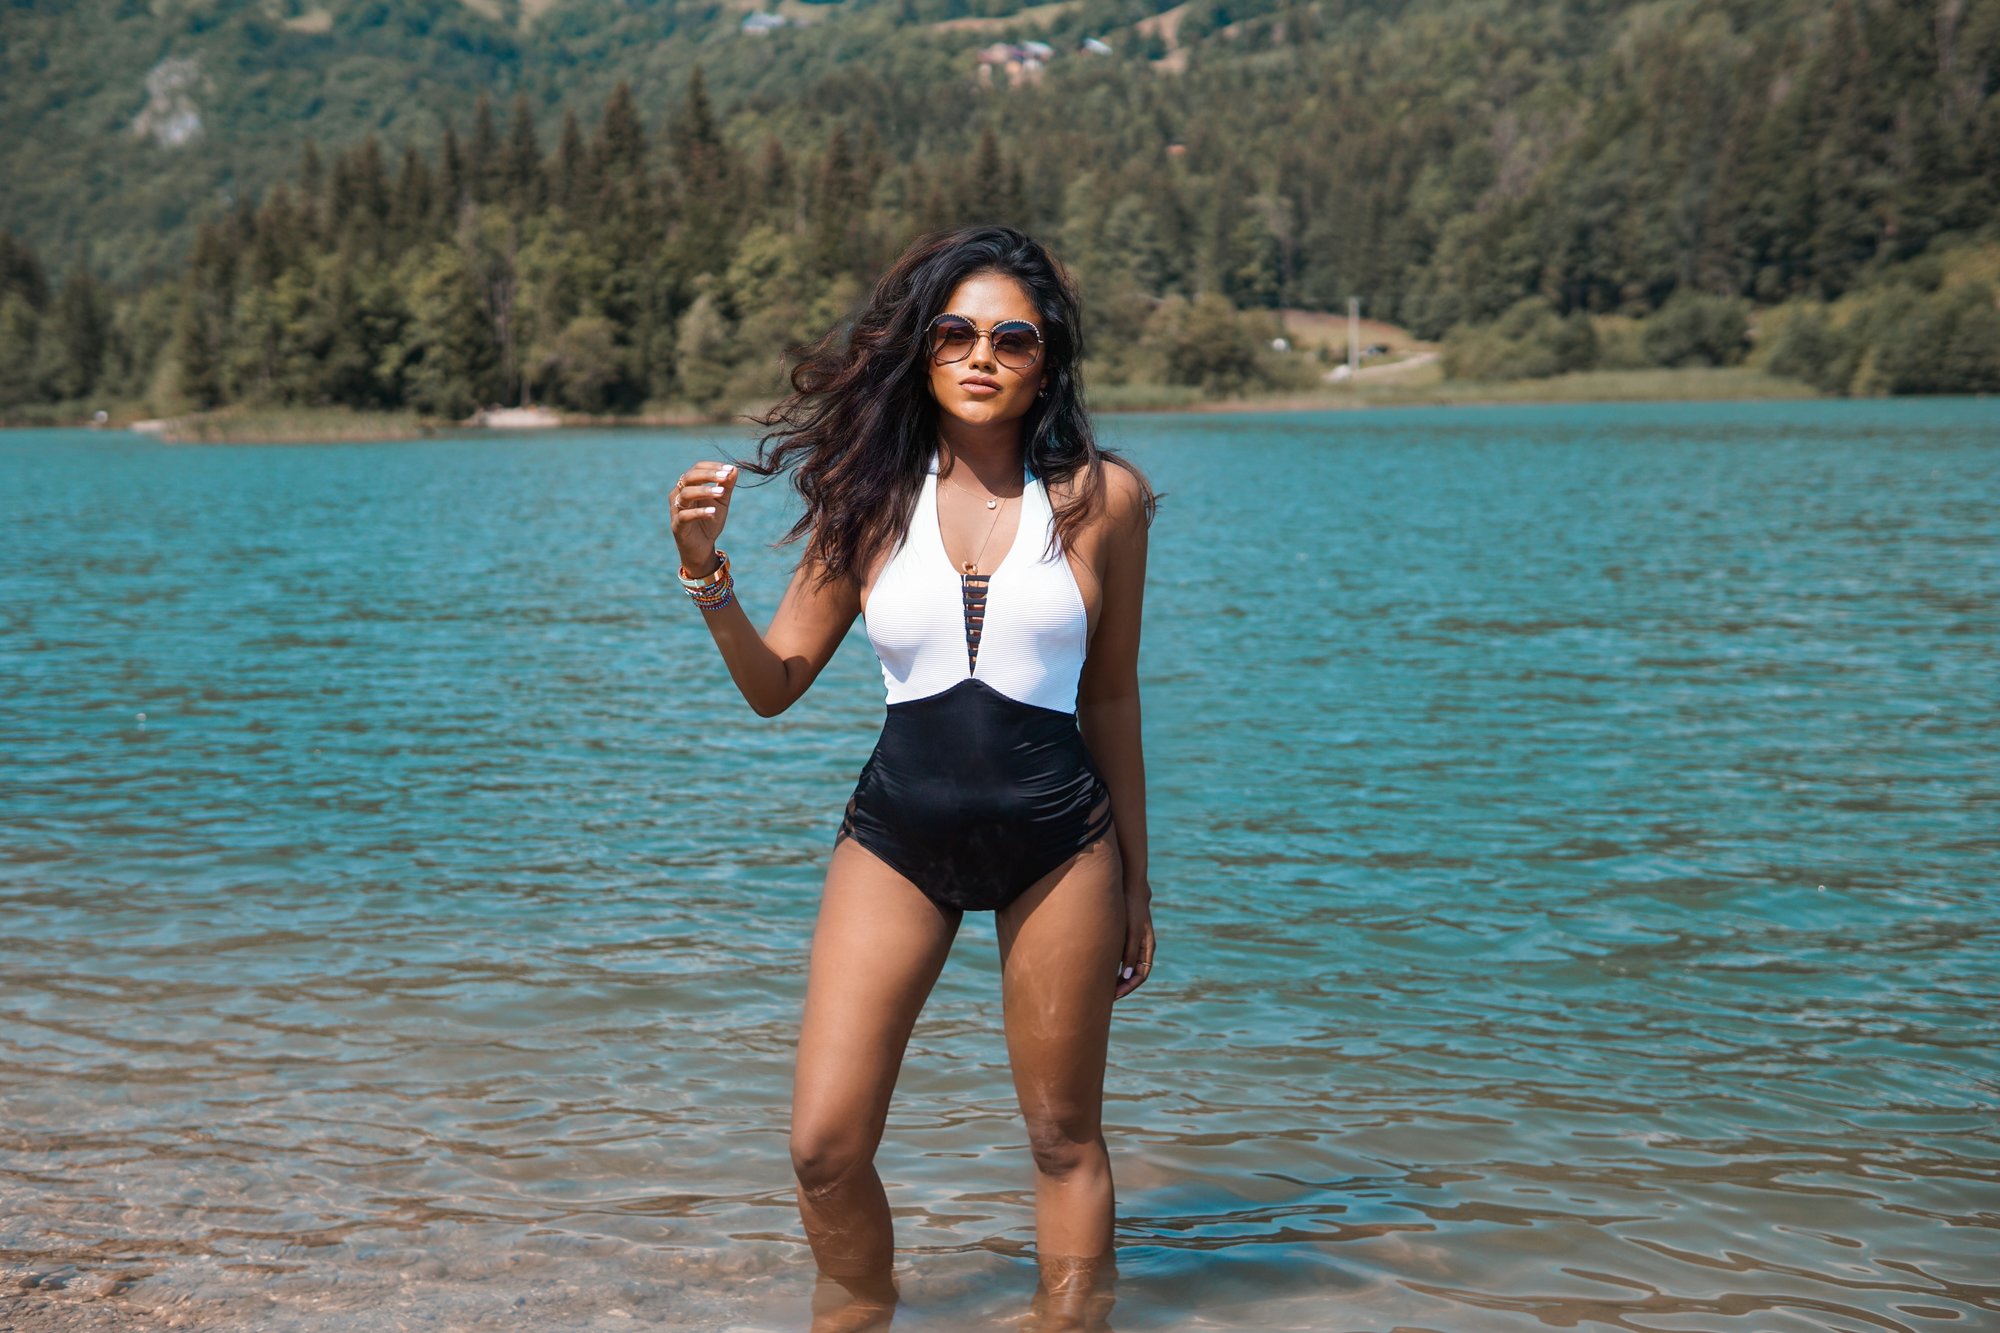 Sachini wearing Chanel sunglasses and a black and white swimsuit standing in front a mountain lake